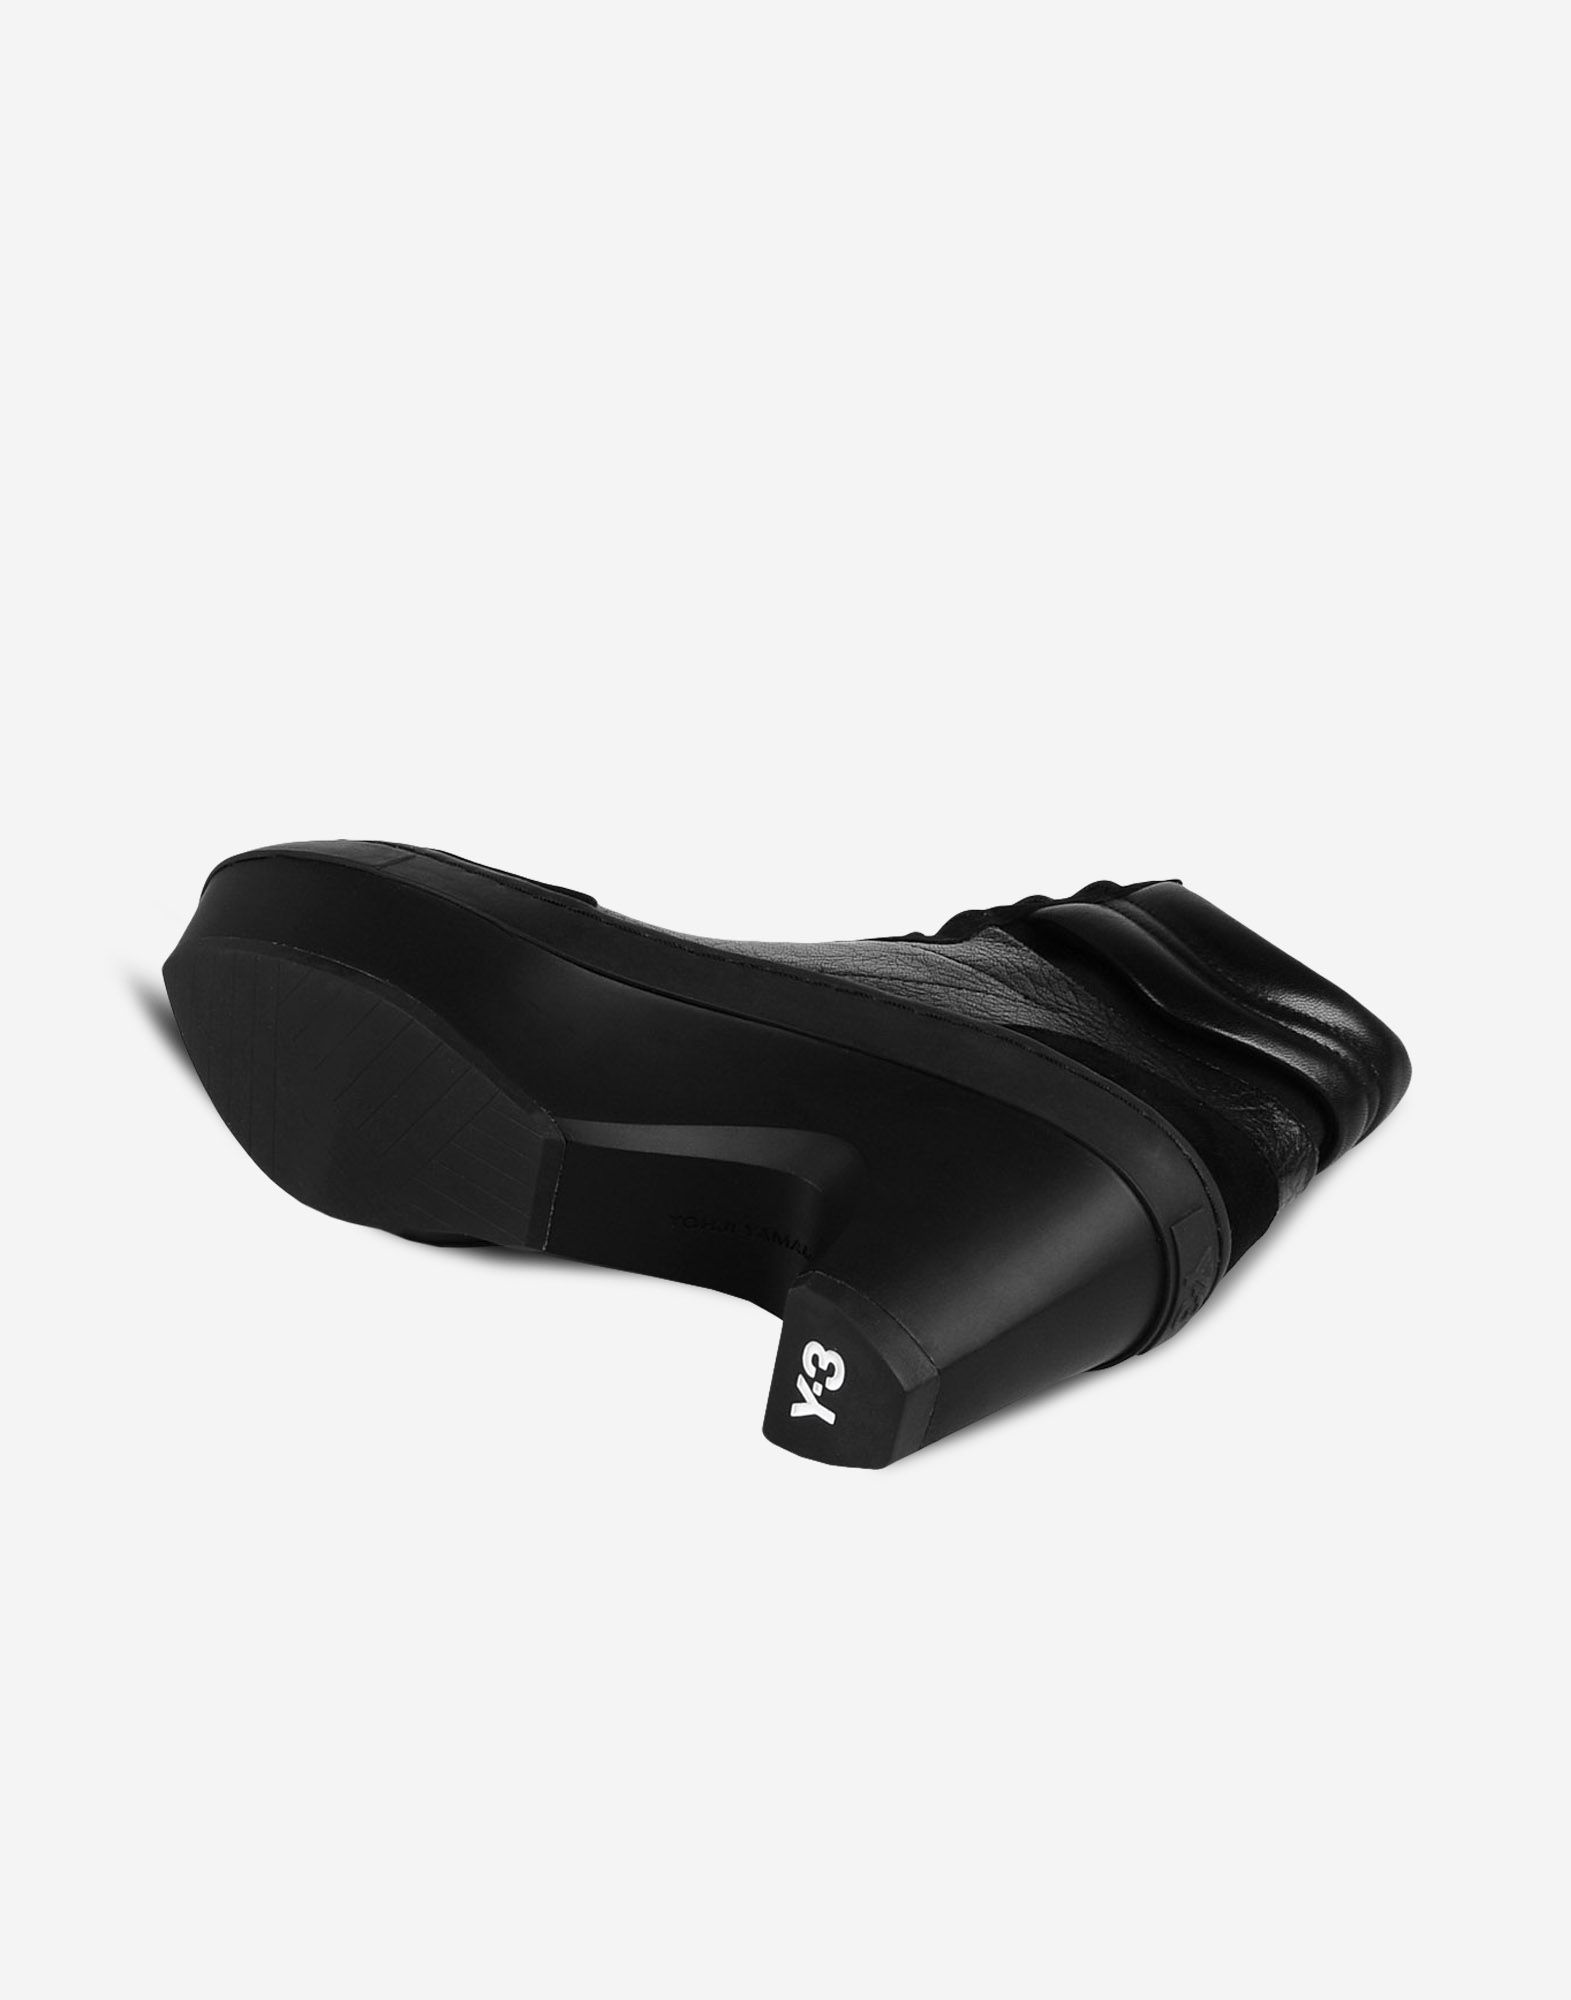 Y 3 Sneaker Clog for Women | Adidas Y-3 Official Store